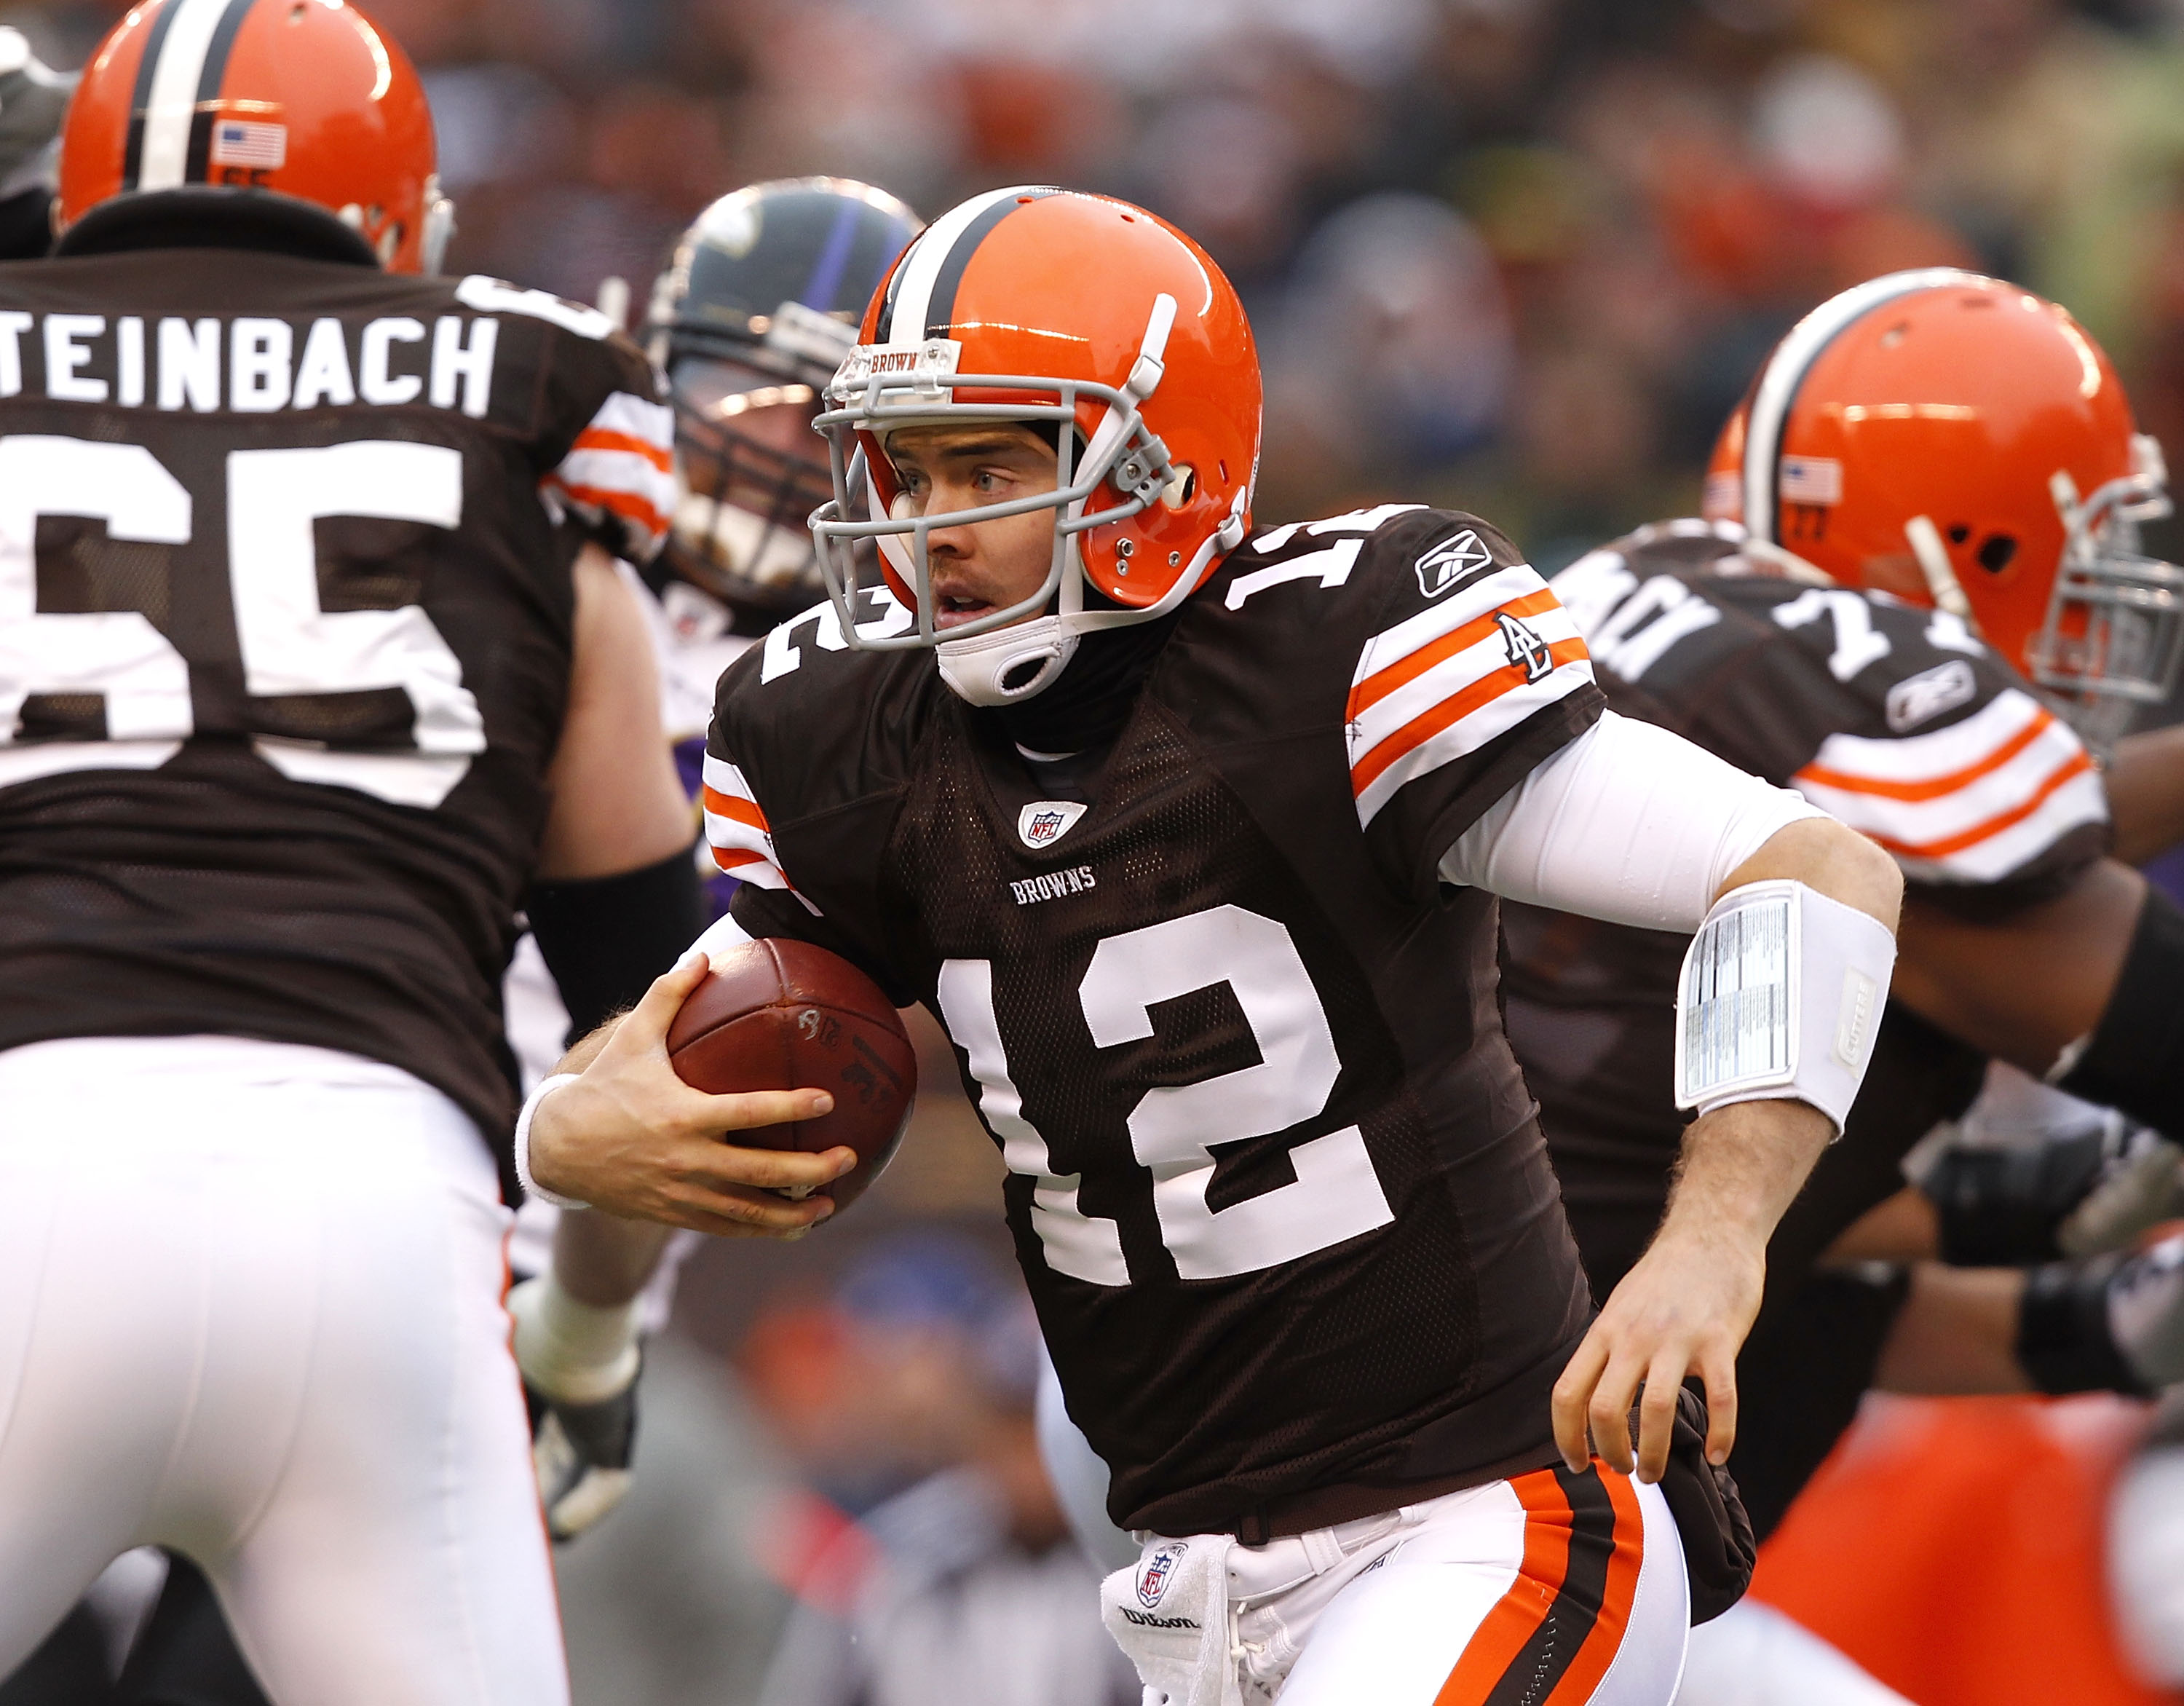 CLEVELAND - DECEMBER 26:  Quarterback Colt McCoy #12 of the Cleveland Browns runs the ball against the Baltimore Ravens at Cleveland Browns Stadium on December 26, 2010 in Cleveland, Ohio.  (Photo by Matt Sullivan/Getty Images)